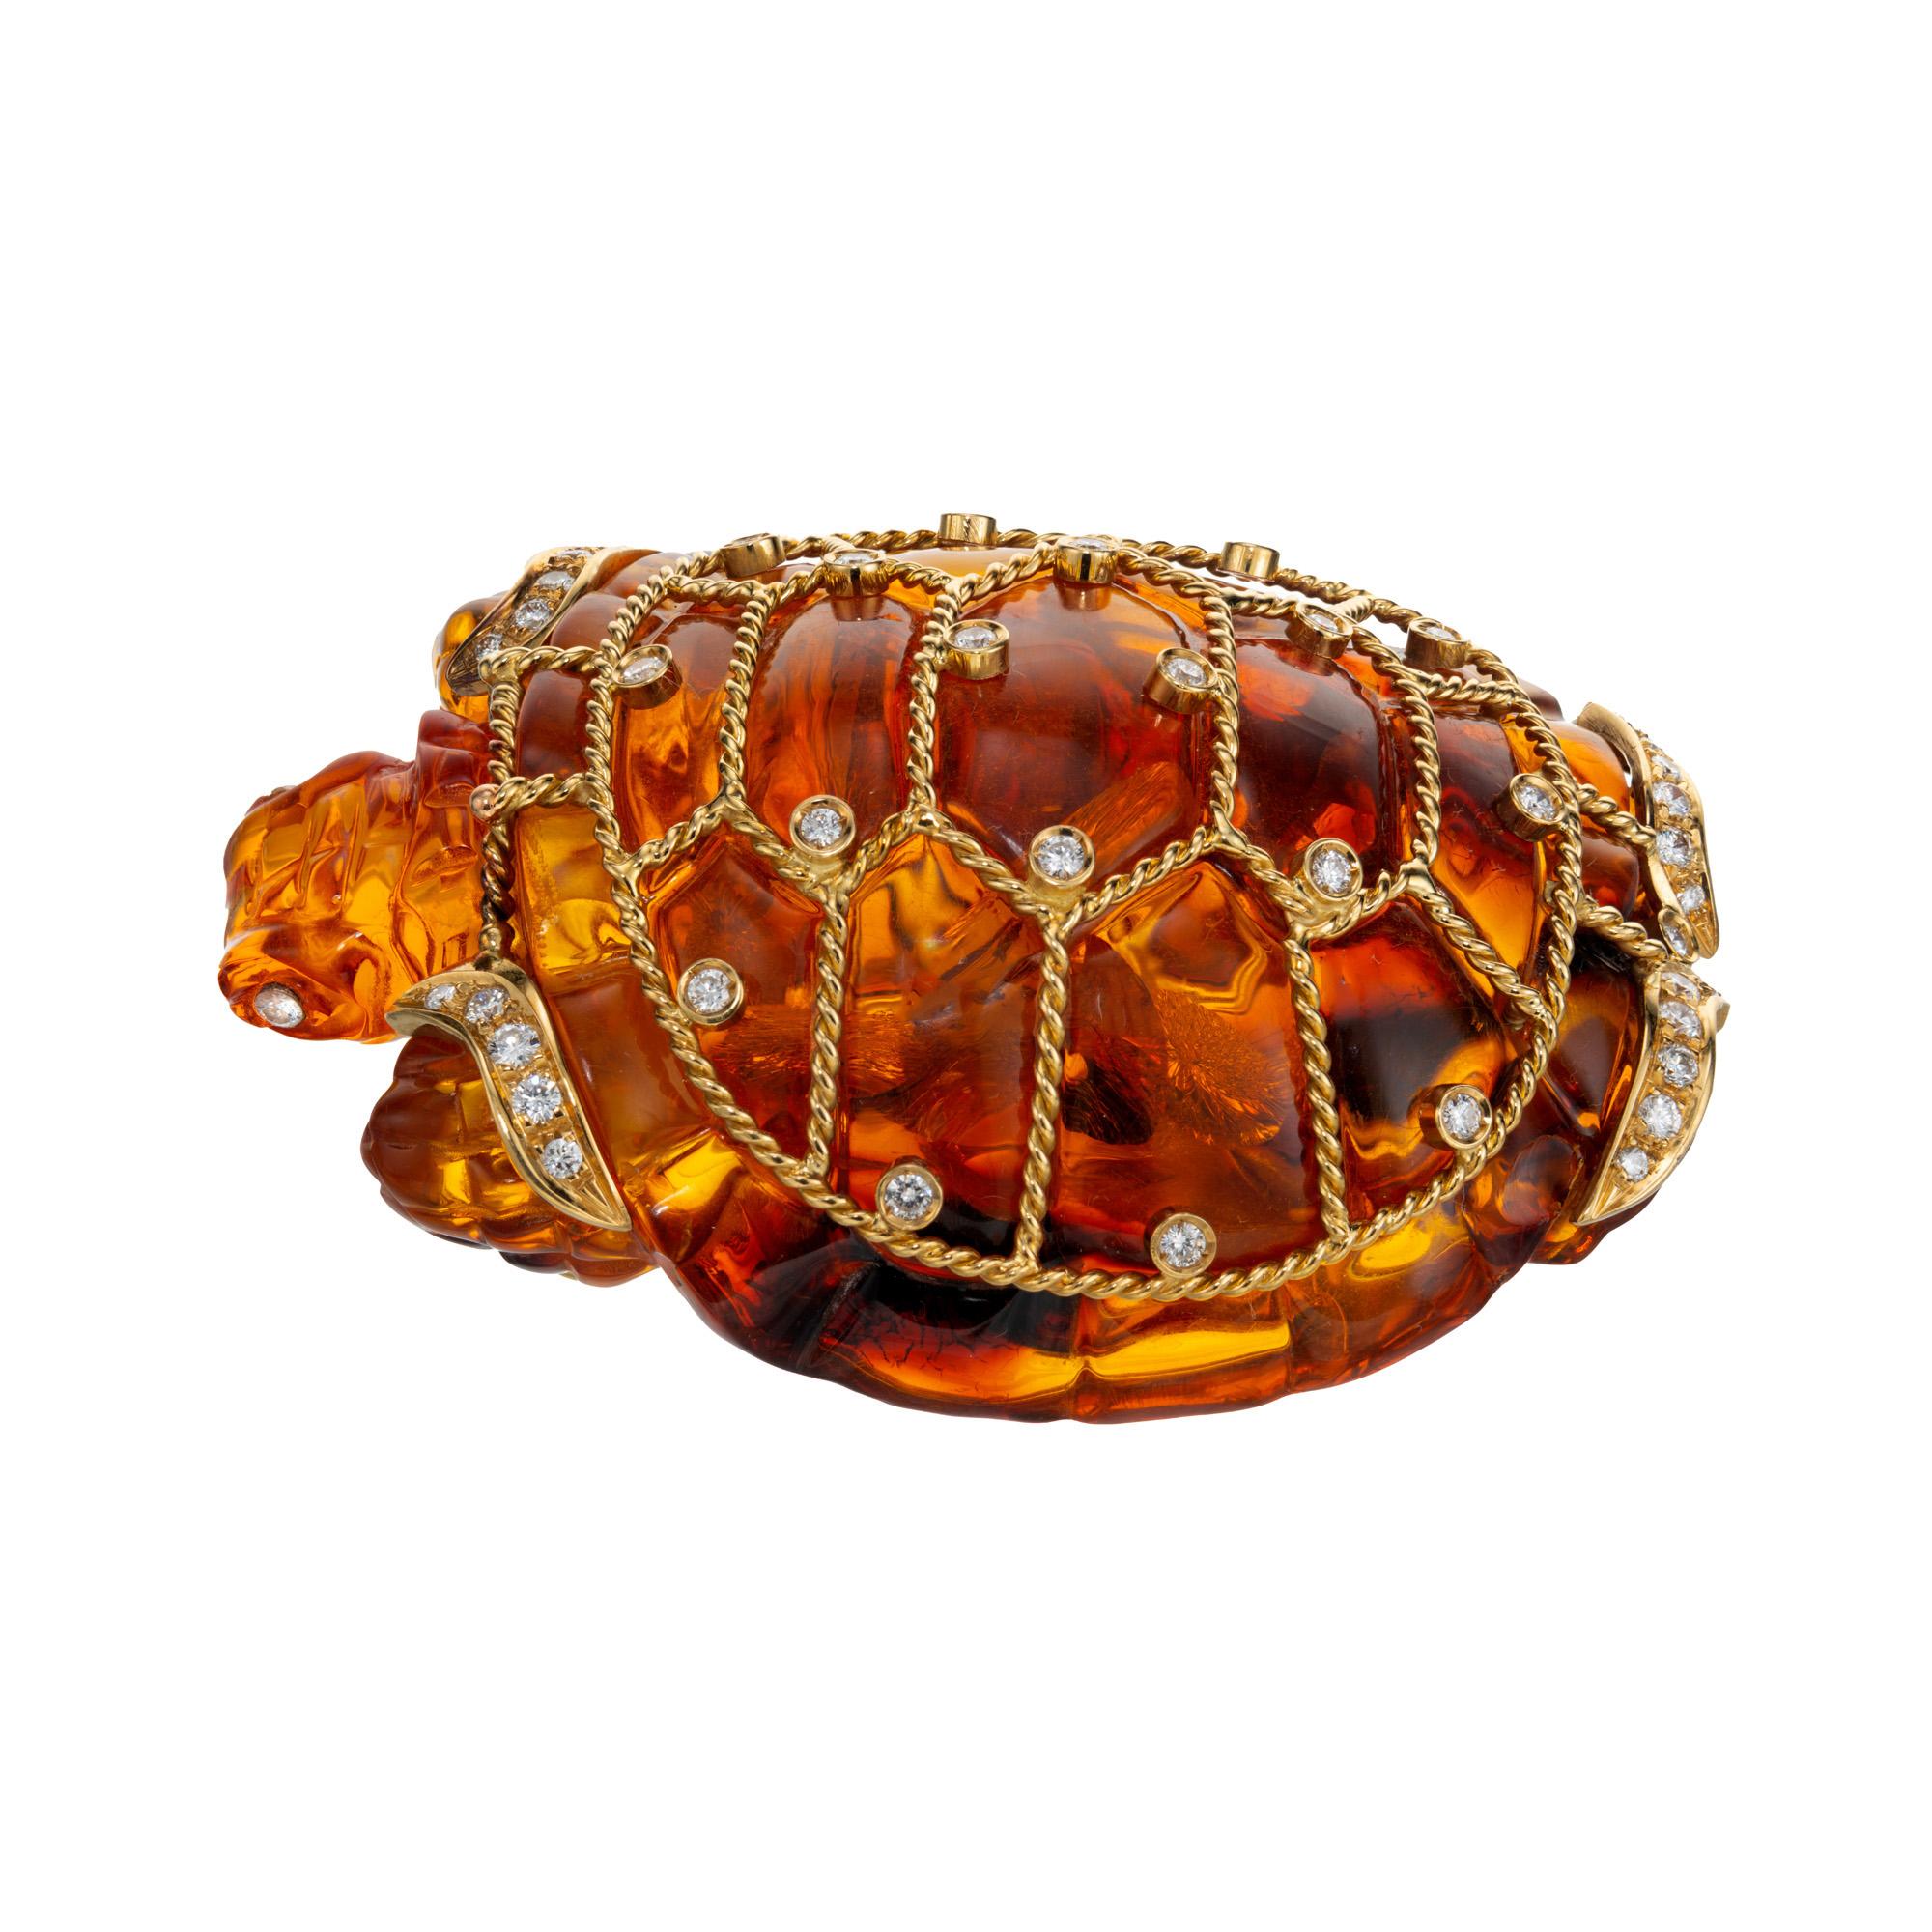 Unique, richly colored large carved amber turtle brooch. This carved amber turtle is decorated with an 18k yellow gold twisted wire framing, accented with 43 brilliant cut bezel and free style diamonds. Secure double pin catch.

1 carved fine amber